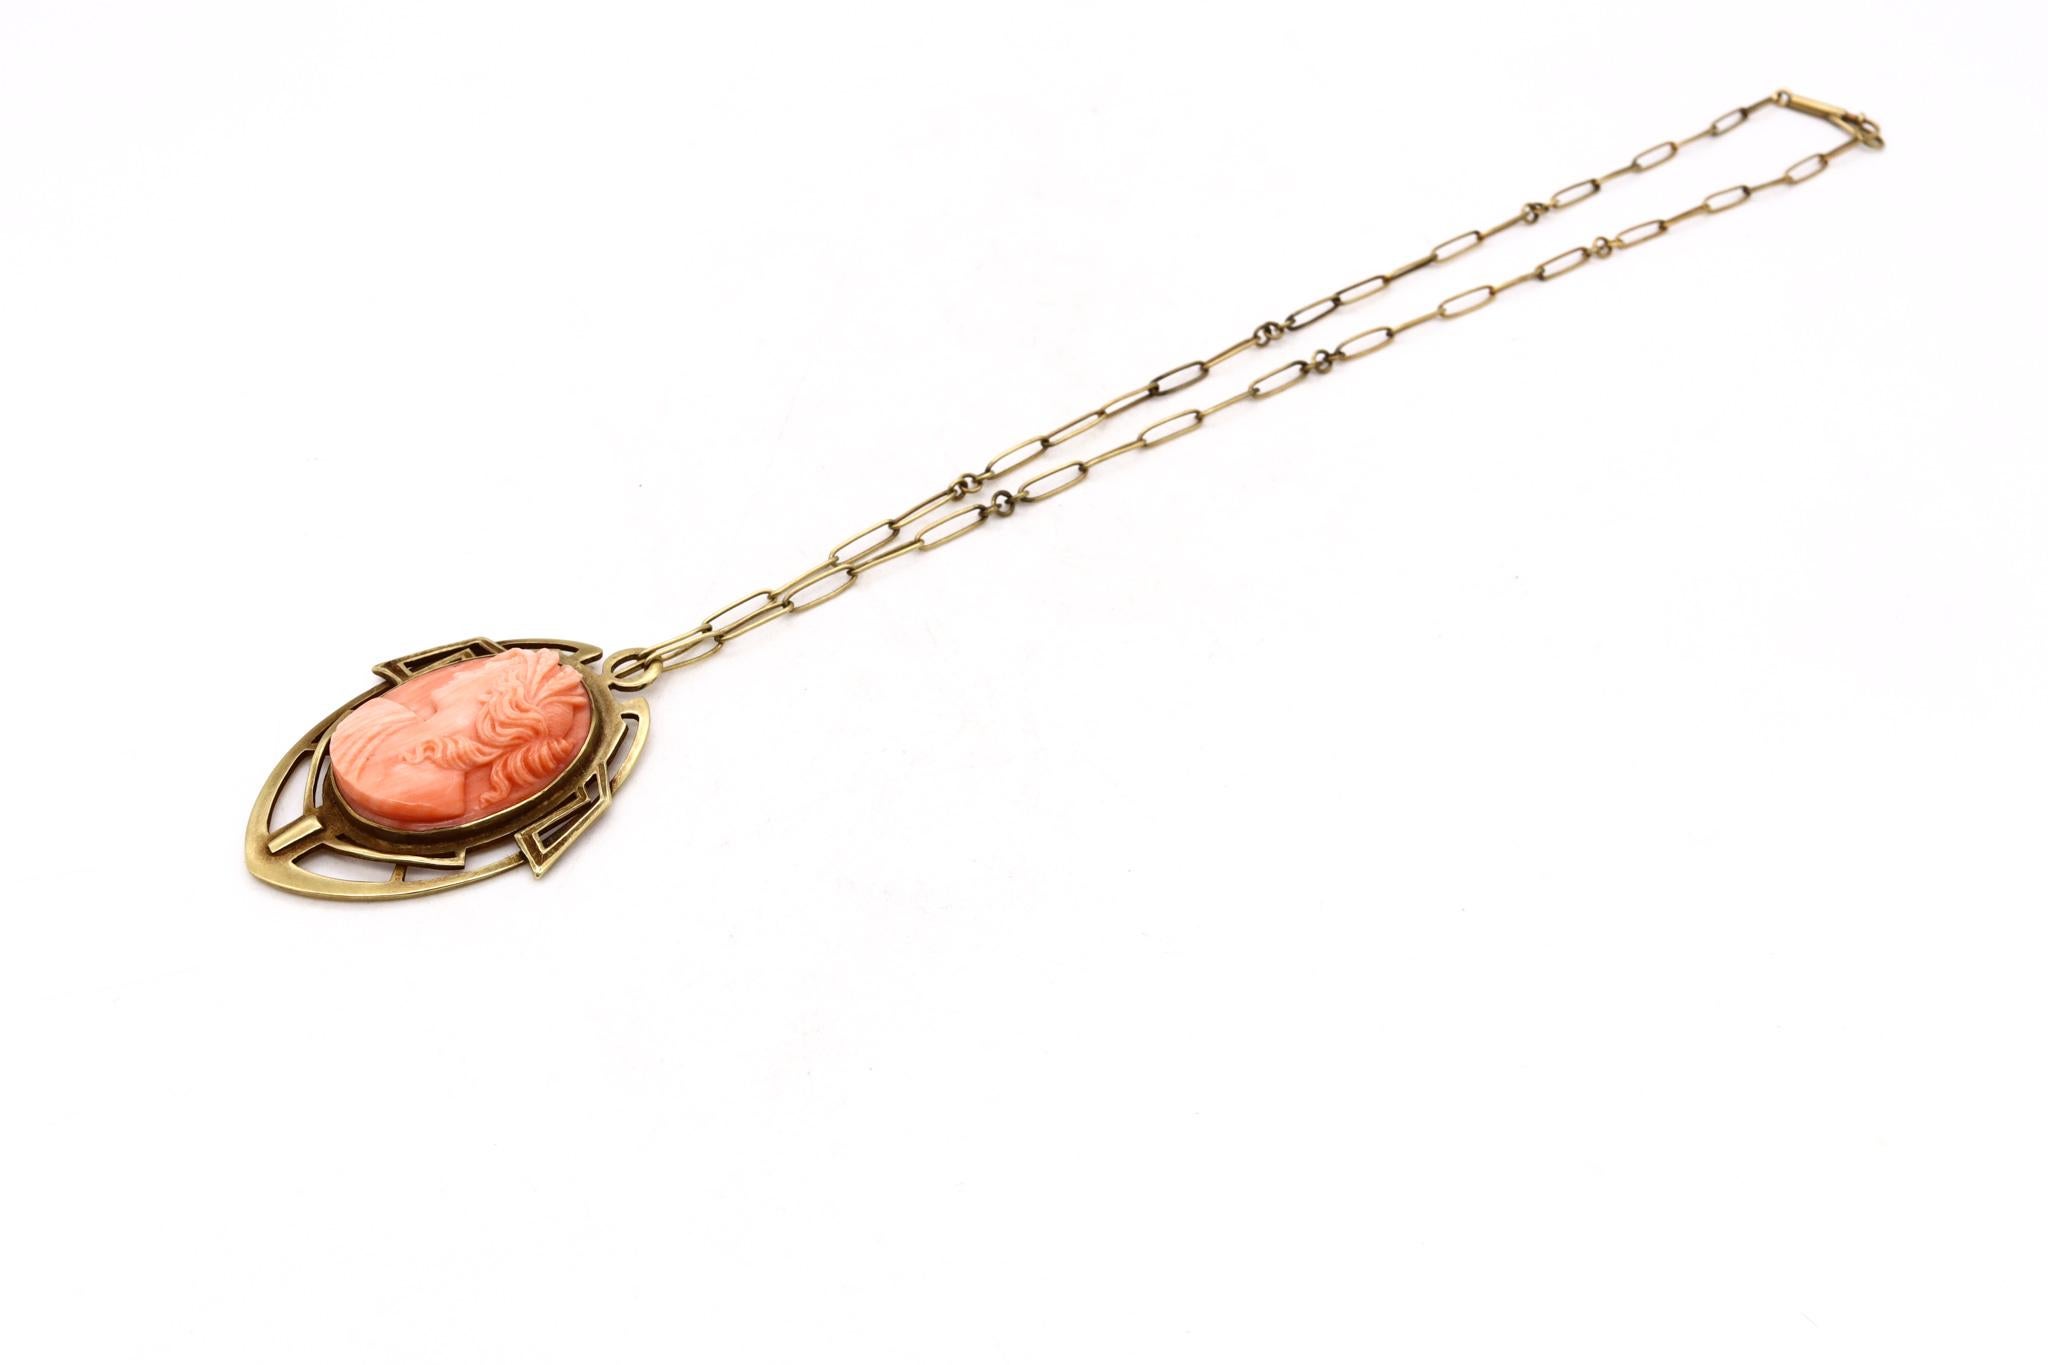 British 1890 Rare Liberty Art and Craft Geometric Necklace 18kt Gold Coral Cameo For Sale 3